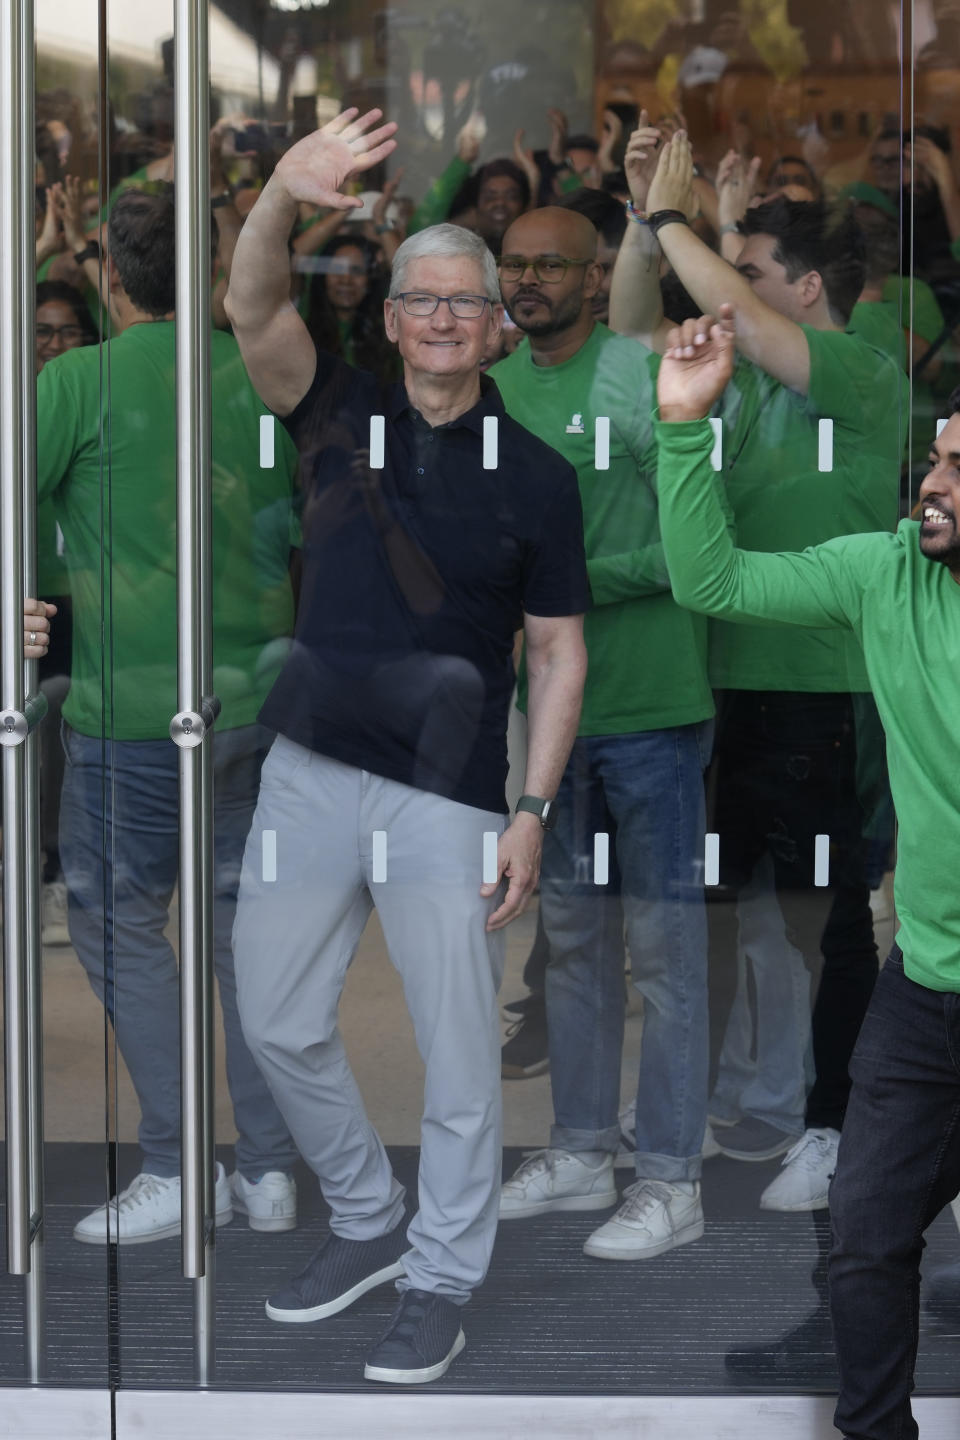 Apple CEO Tim Cook waves to the dozens of people waiting outside during the opening of the first Apple Inc. flagship store in Mumbai, India, Tuesday, April 18, 2023. Apple Inc. opened its first flagship store in India in a much-anticipated launch Tuesday that highlights the company’s growing aspirations to expand in the country it also hopes to turn into a potential manufacturing hub. (AP Photo/Rafiq Maqbool)